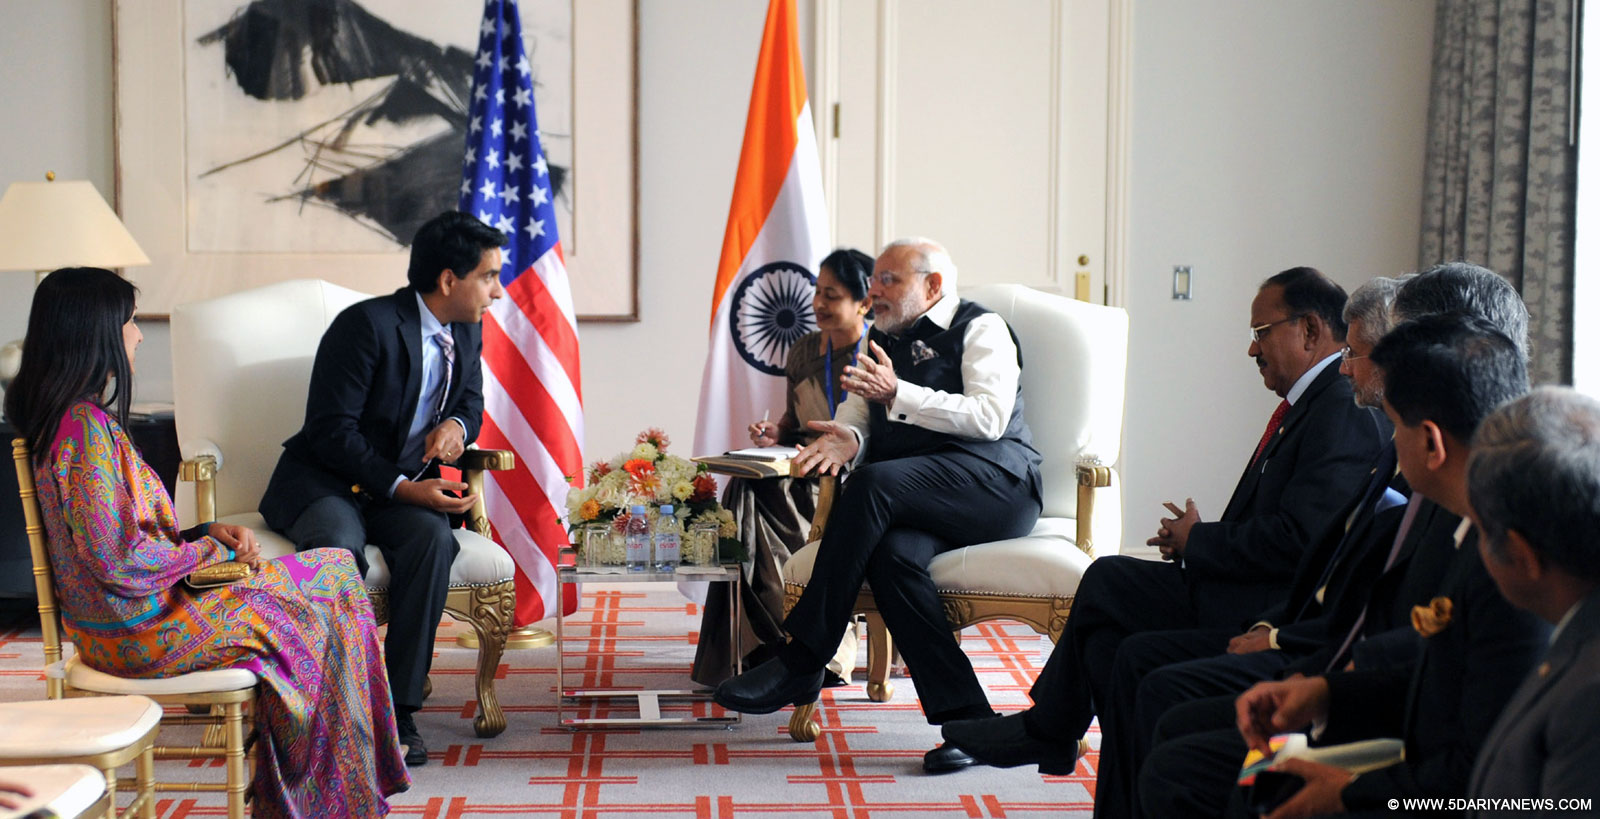 The Prime Minister, Shri Narendra Modi with the Founder and CEO, Khan Academy, Mr. Salman Khan, in San Jose, California on September 27, 2015.